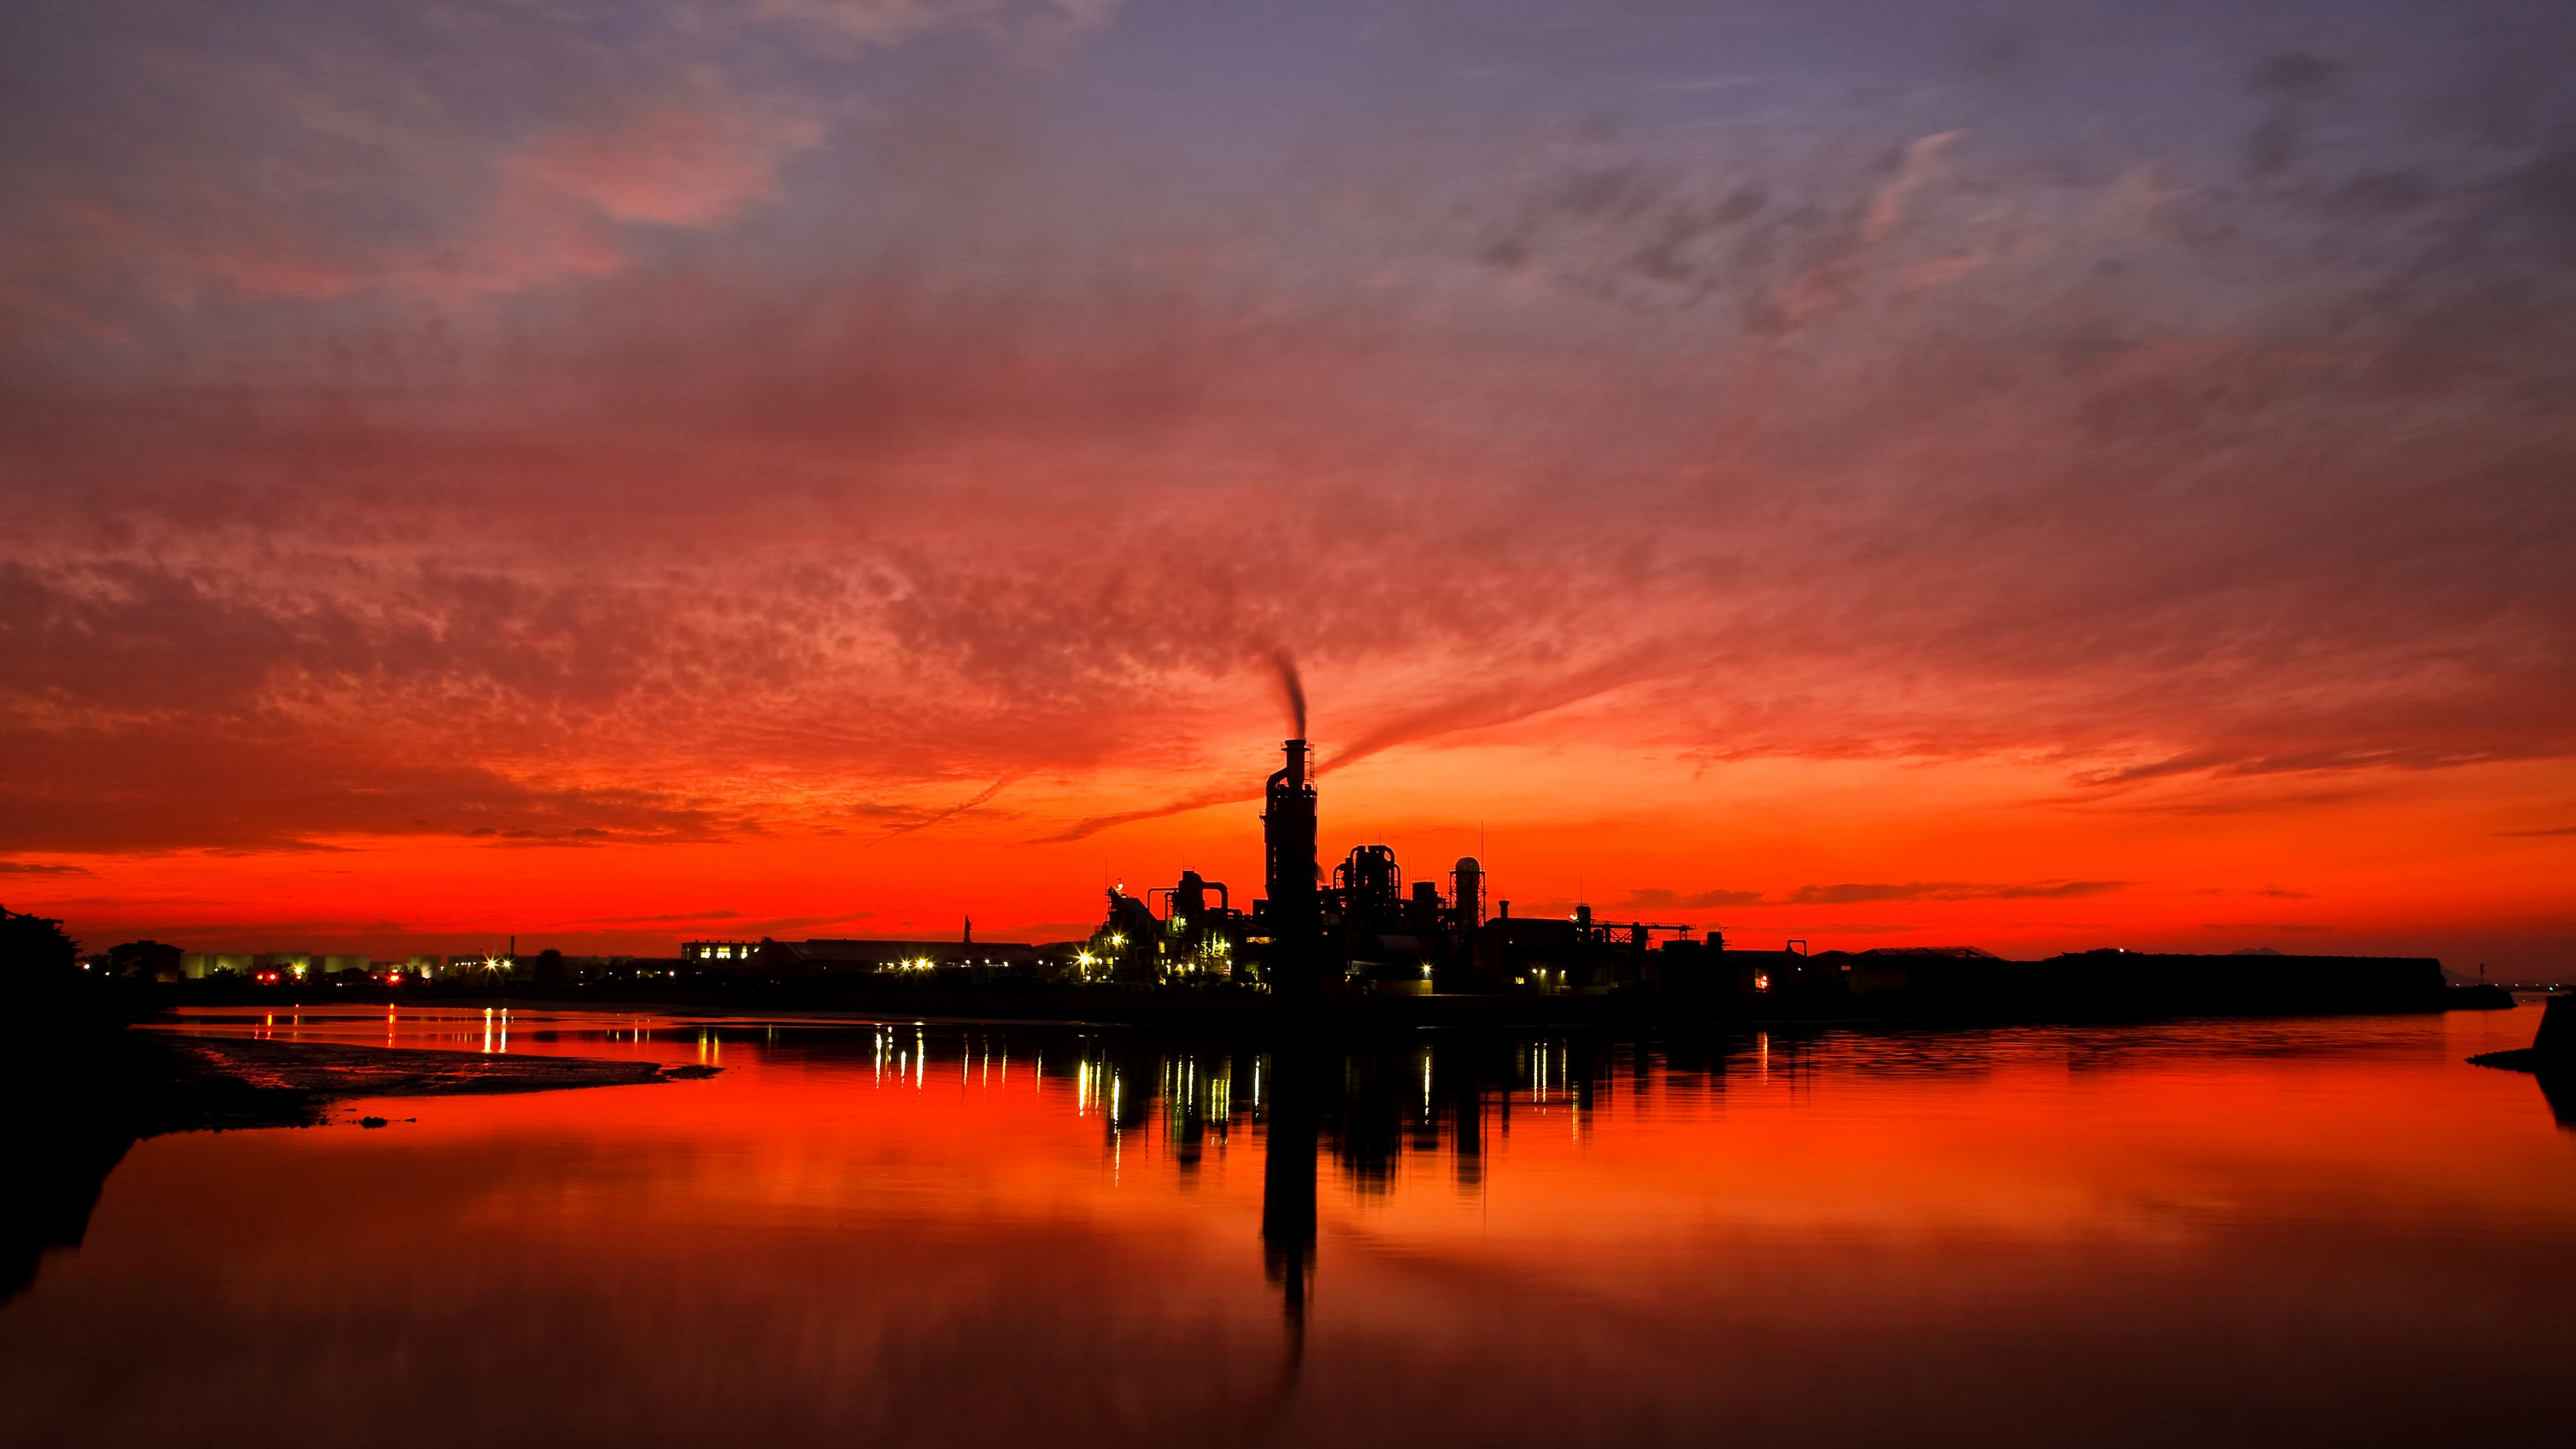 Silhouette of Building Near Body of Water During Sunset. Wallpaper in 3840x2160 Resolution